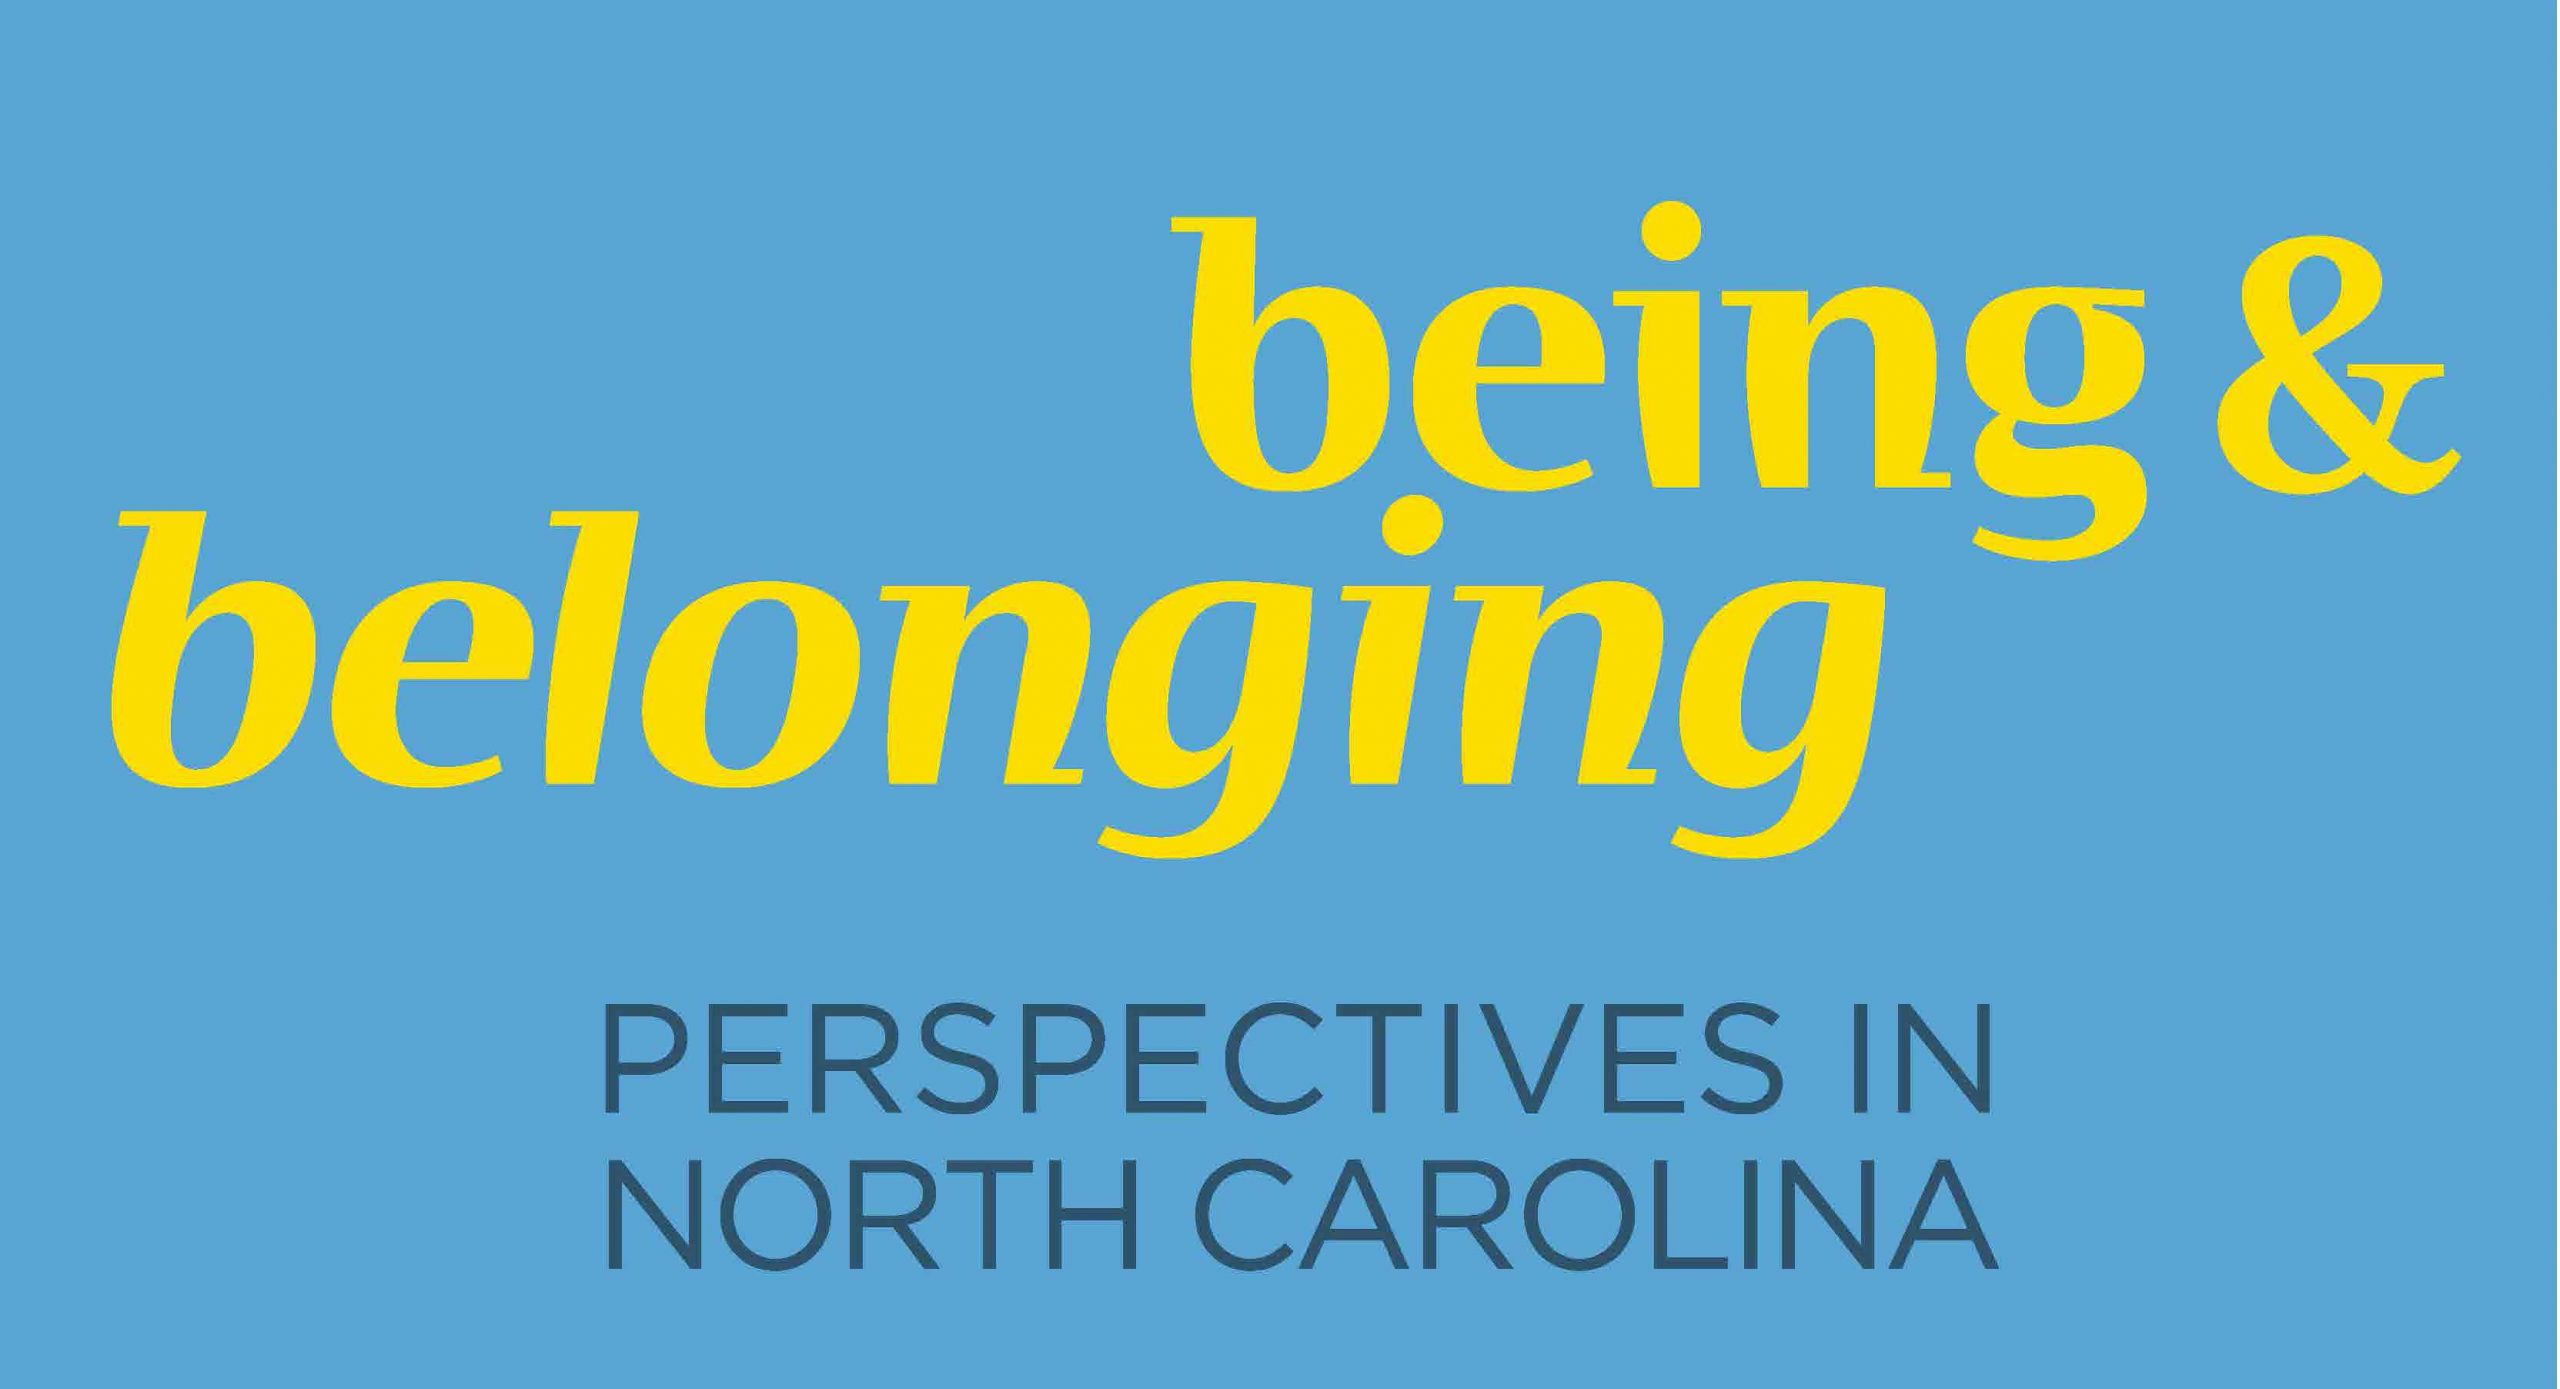 Words on blue background: "Being and Belonging: Perspectives in North Carolina"